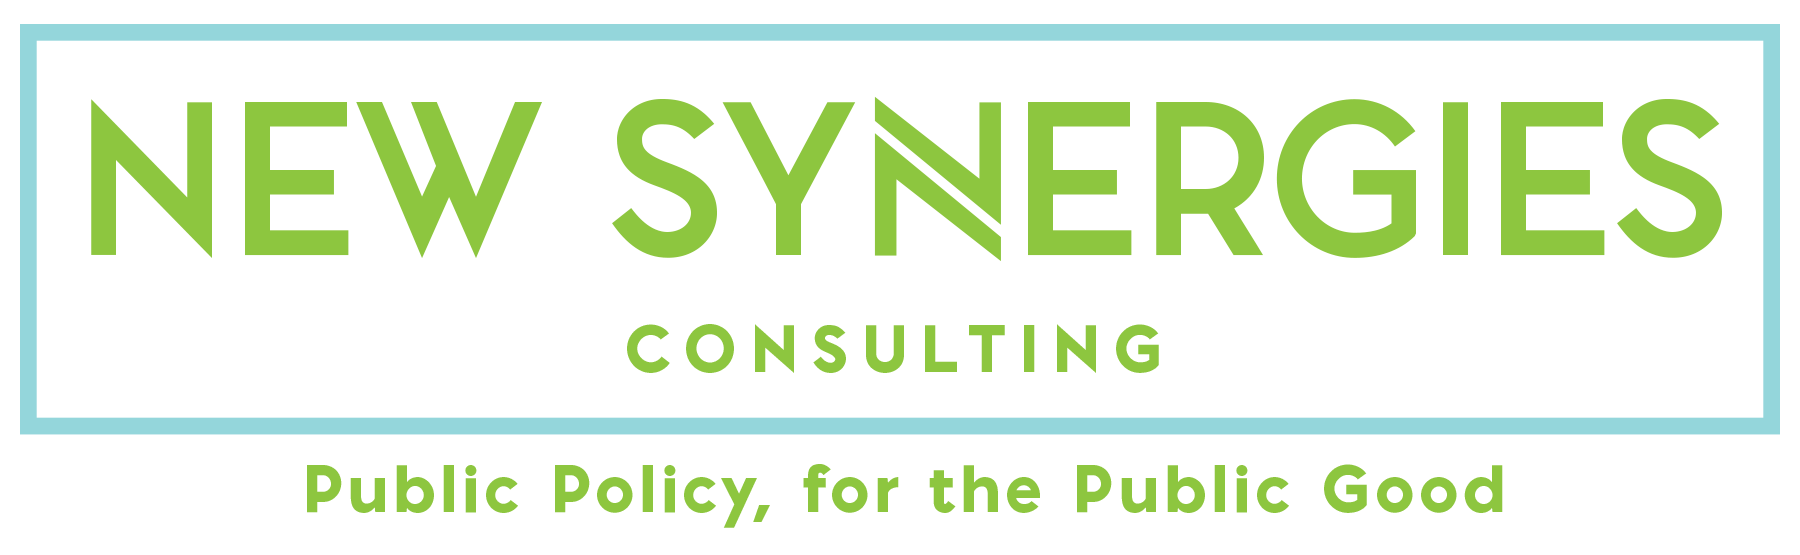 New Synergies Consulting